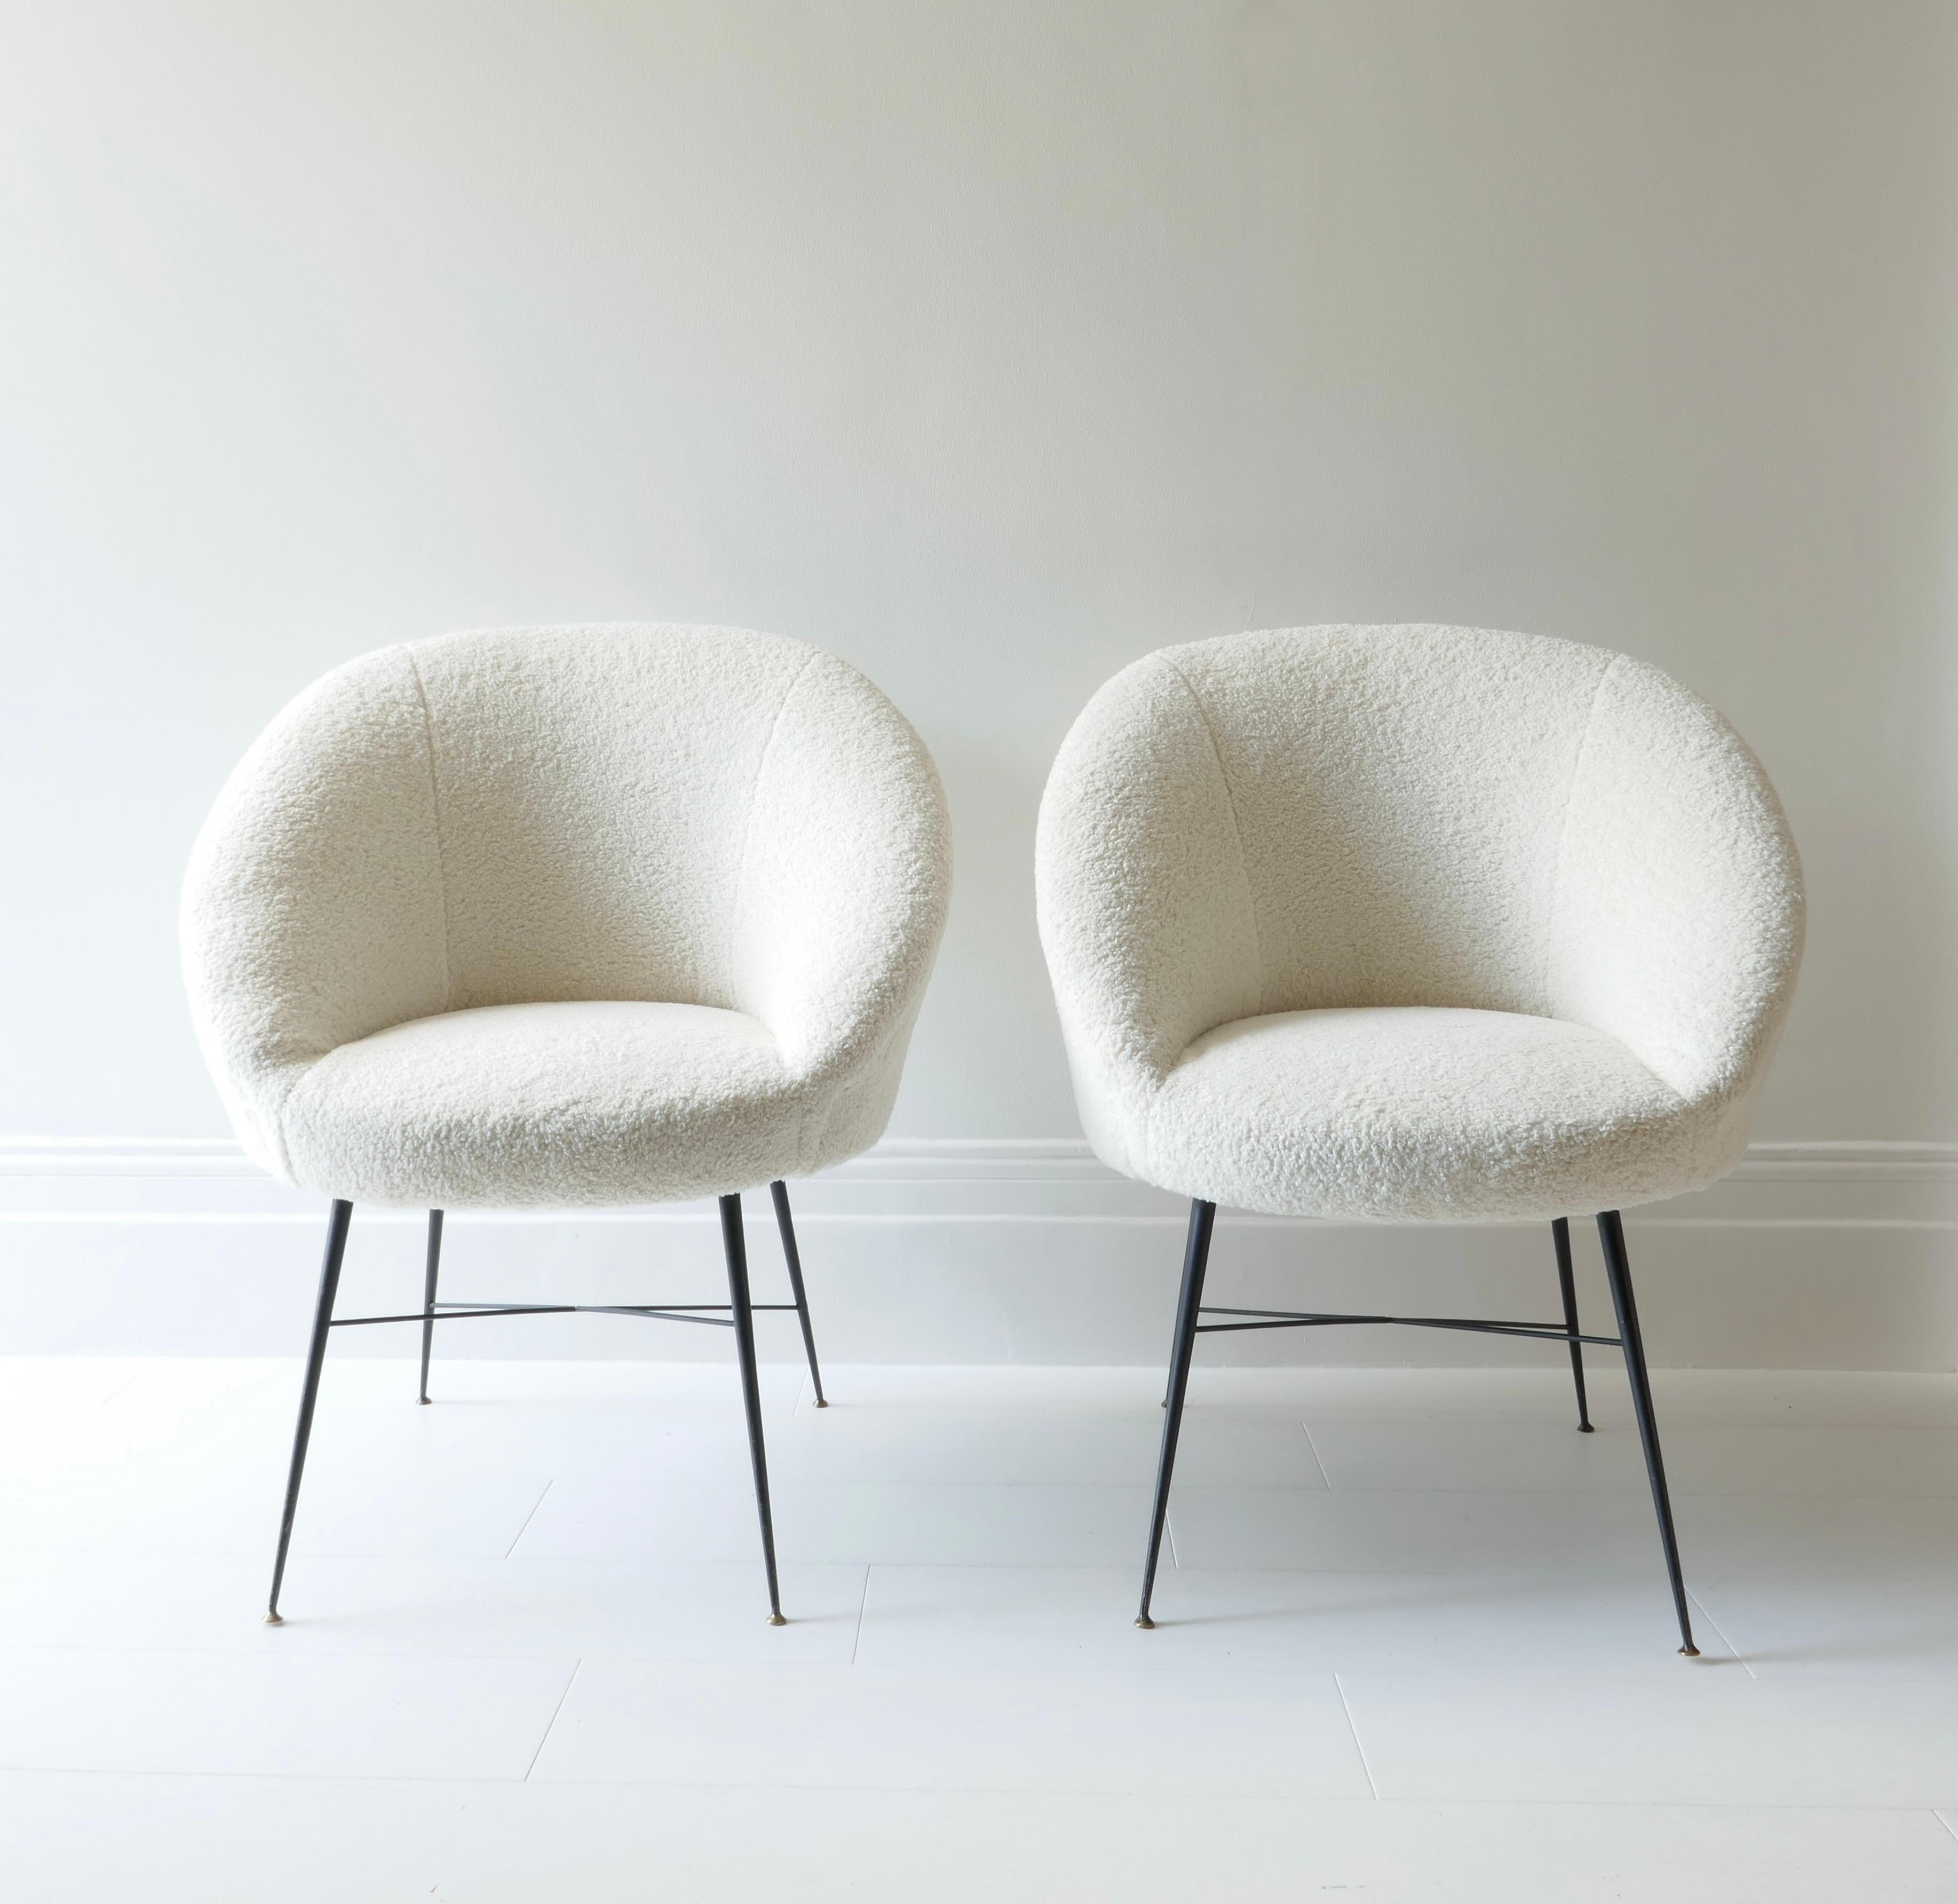 Pair of lounge chairs reupholstered in contemporary white boucle, legs in black metal. Italy, 1950s.

An iconic example of Italian design from the fifties. Organic and sculptural, beautifully curved they suit all decor and all rooms .

Measures: